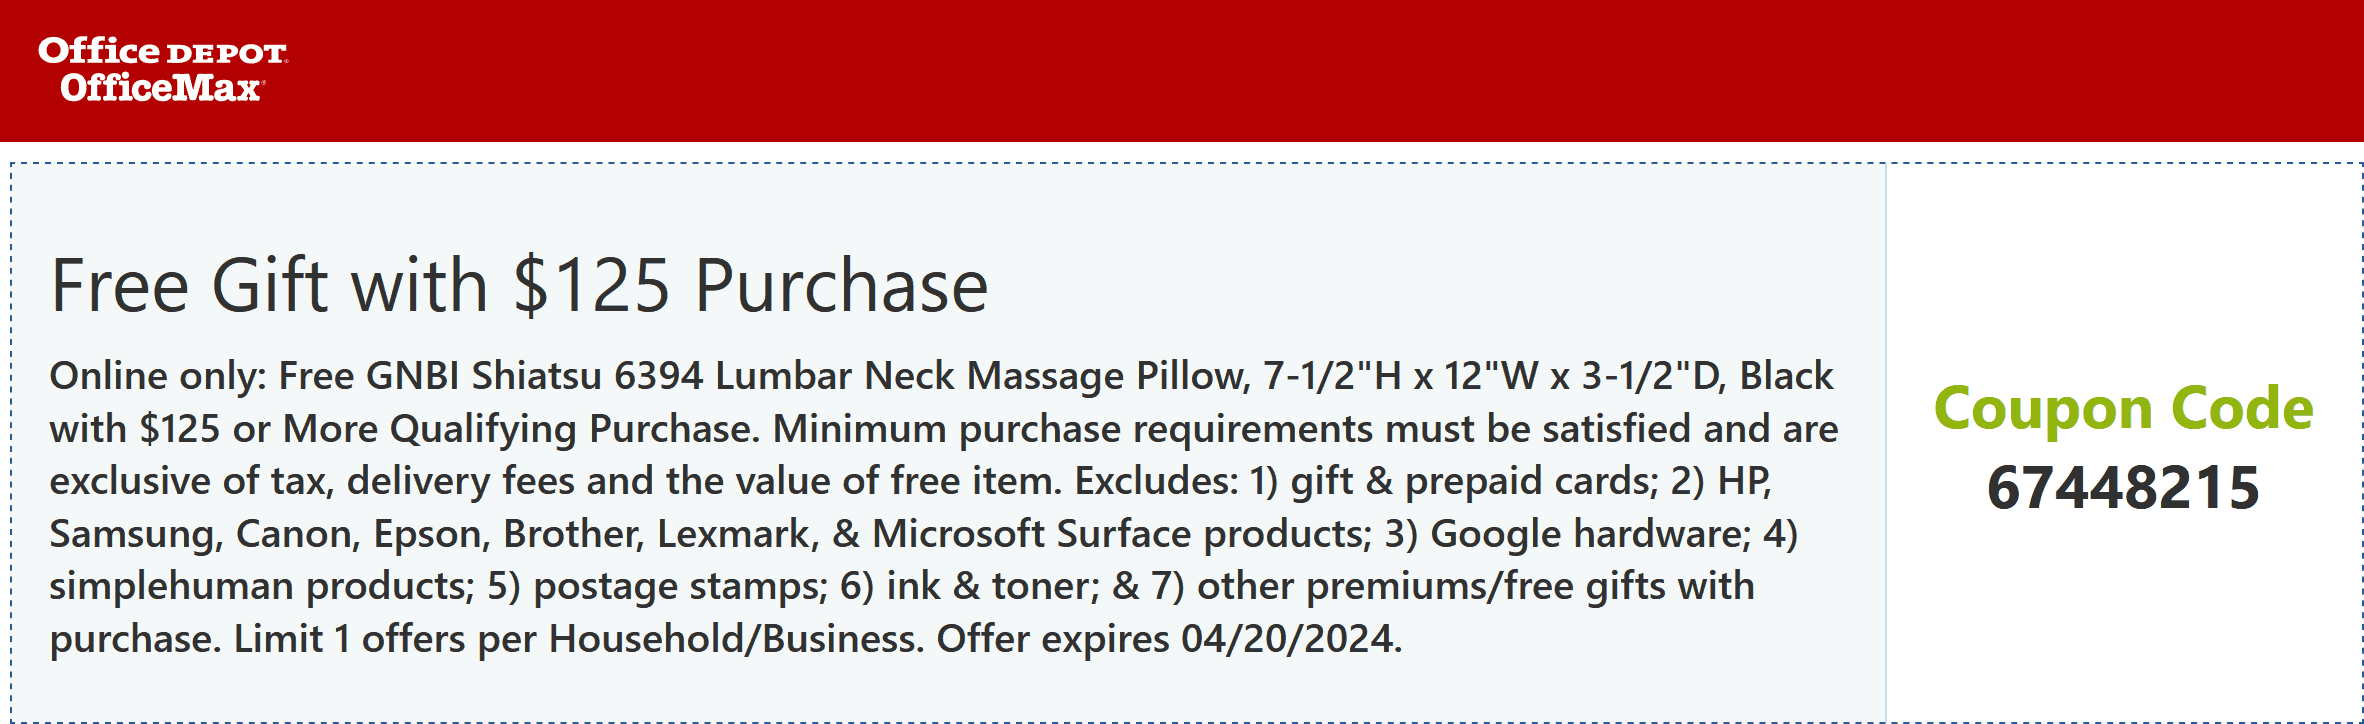 Office Depot stores Coupon  Free shiatsu massage pillow on $125 online at Office Depot OfficeMax via promo code 67448215 #officedepot 